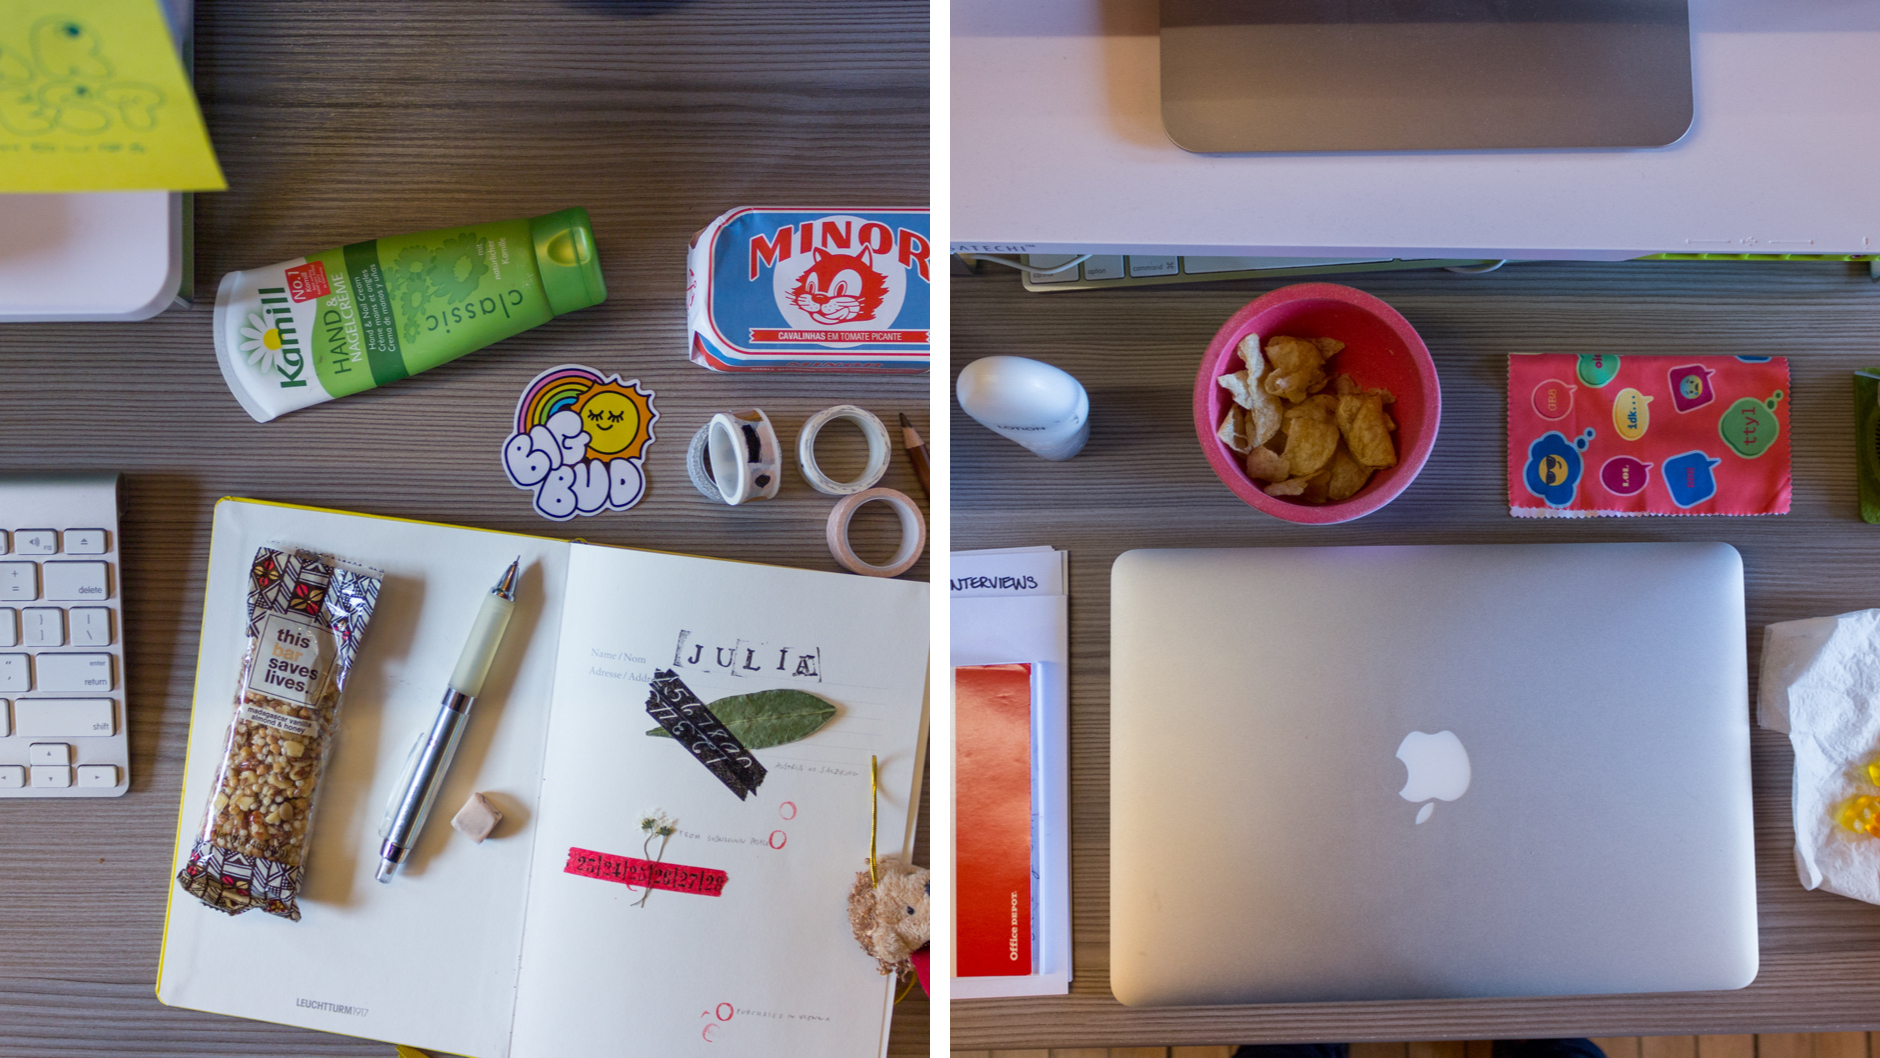 A split screen view of two photos of desks, taken from above. One has an open notebook with doodles, leaves, and assorted knick-knacks. The other has a closed Macbook and assorted snacks.